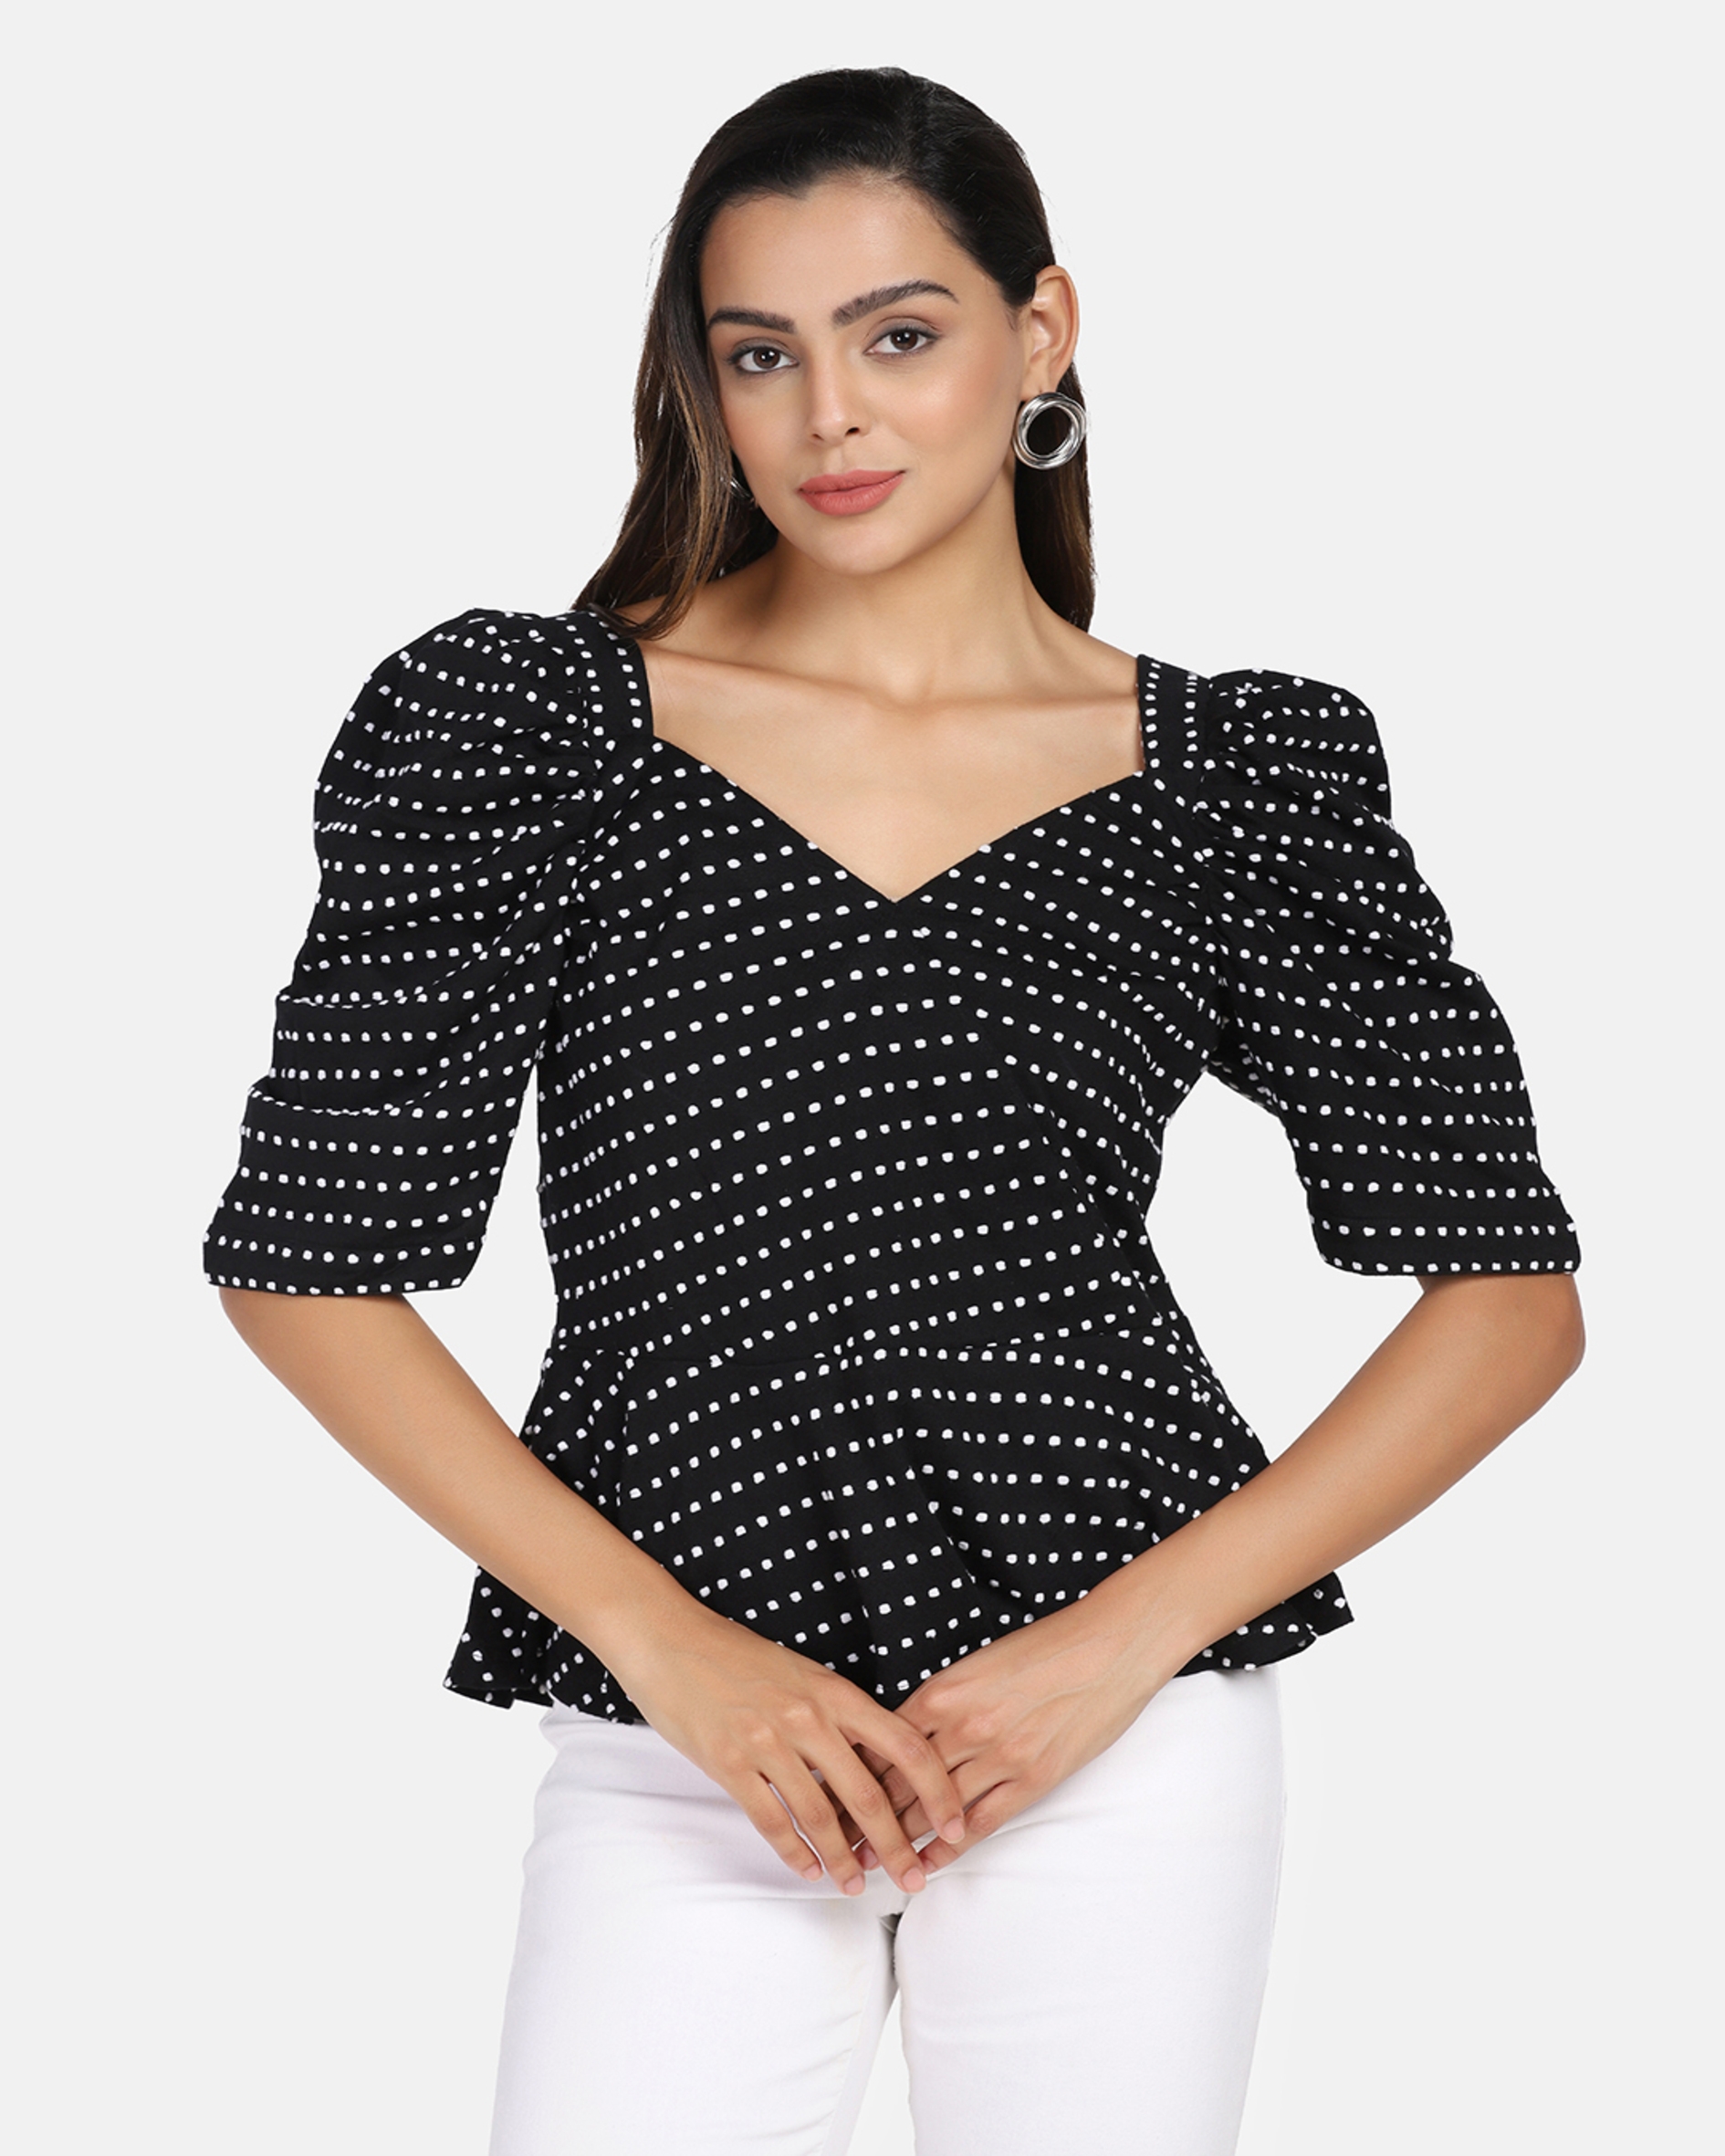 Black Top With White Dots